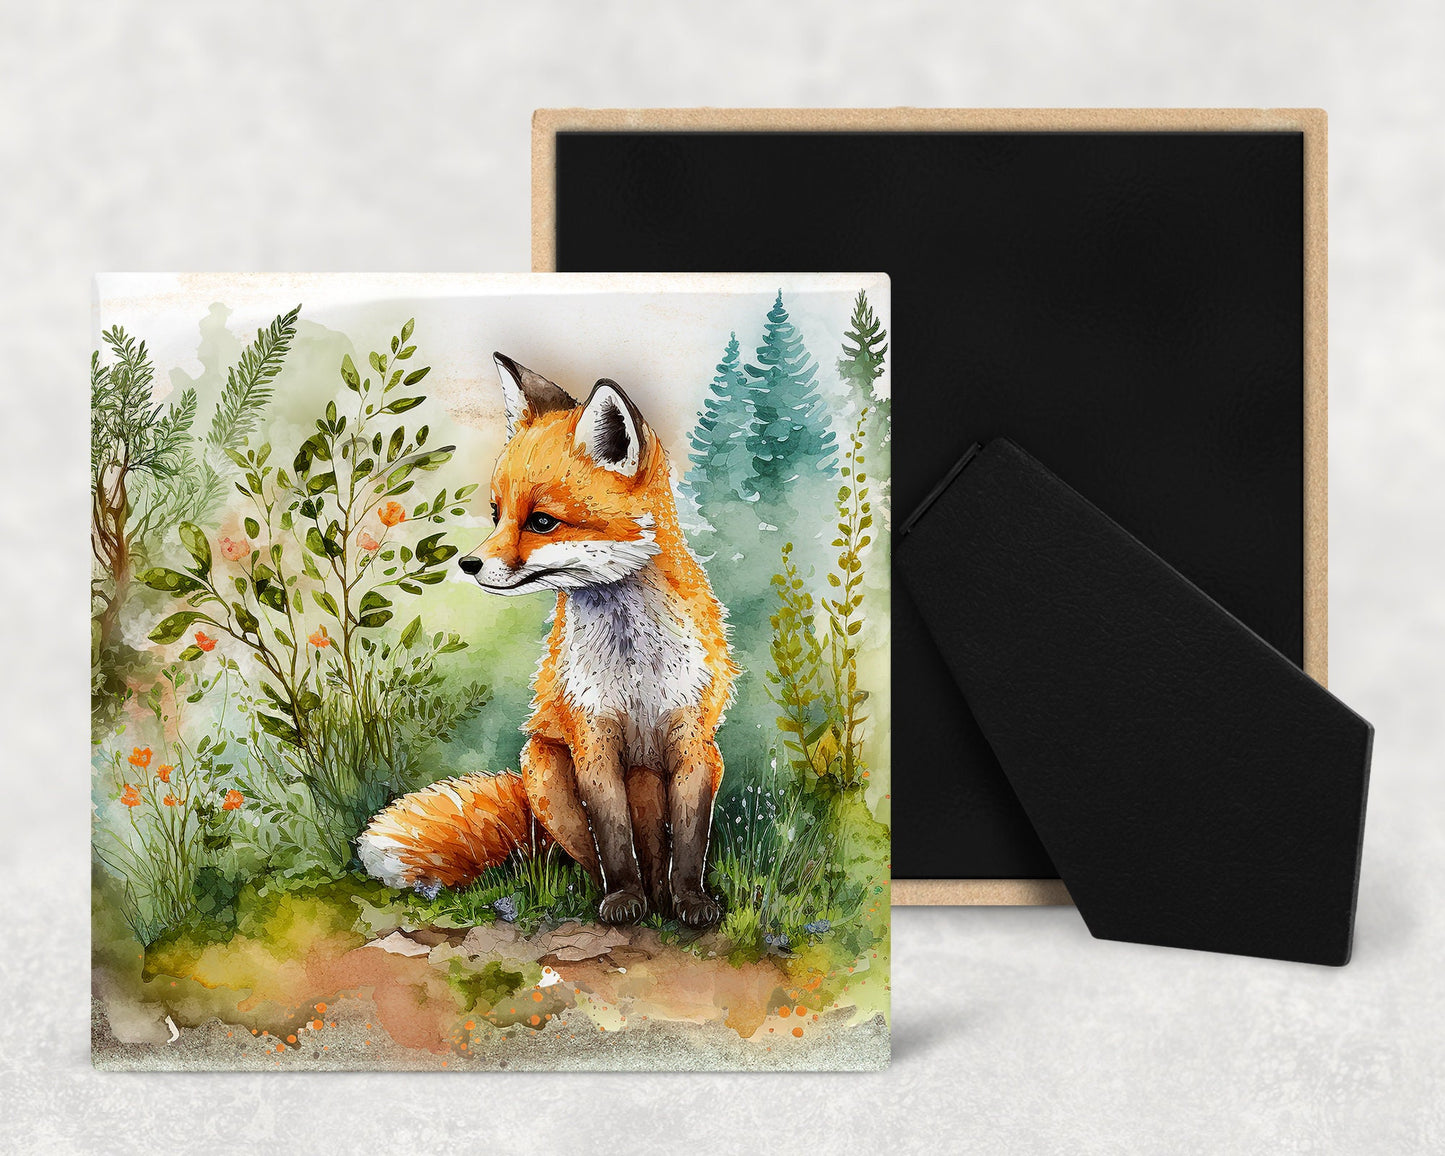 Cute Watercolor Baby Fox Art Decorative Ceramic Tile with Optional Easel Back - Available in 3 Sizes